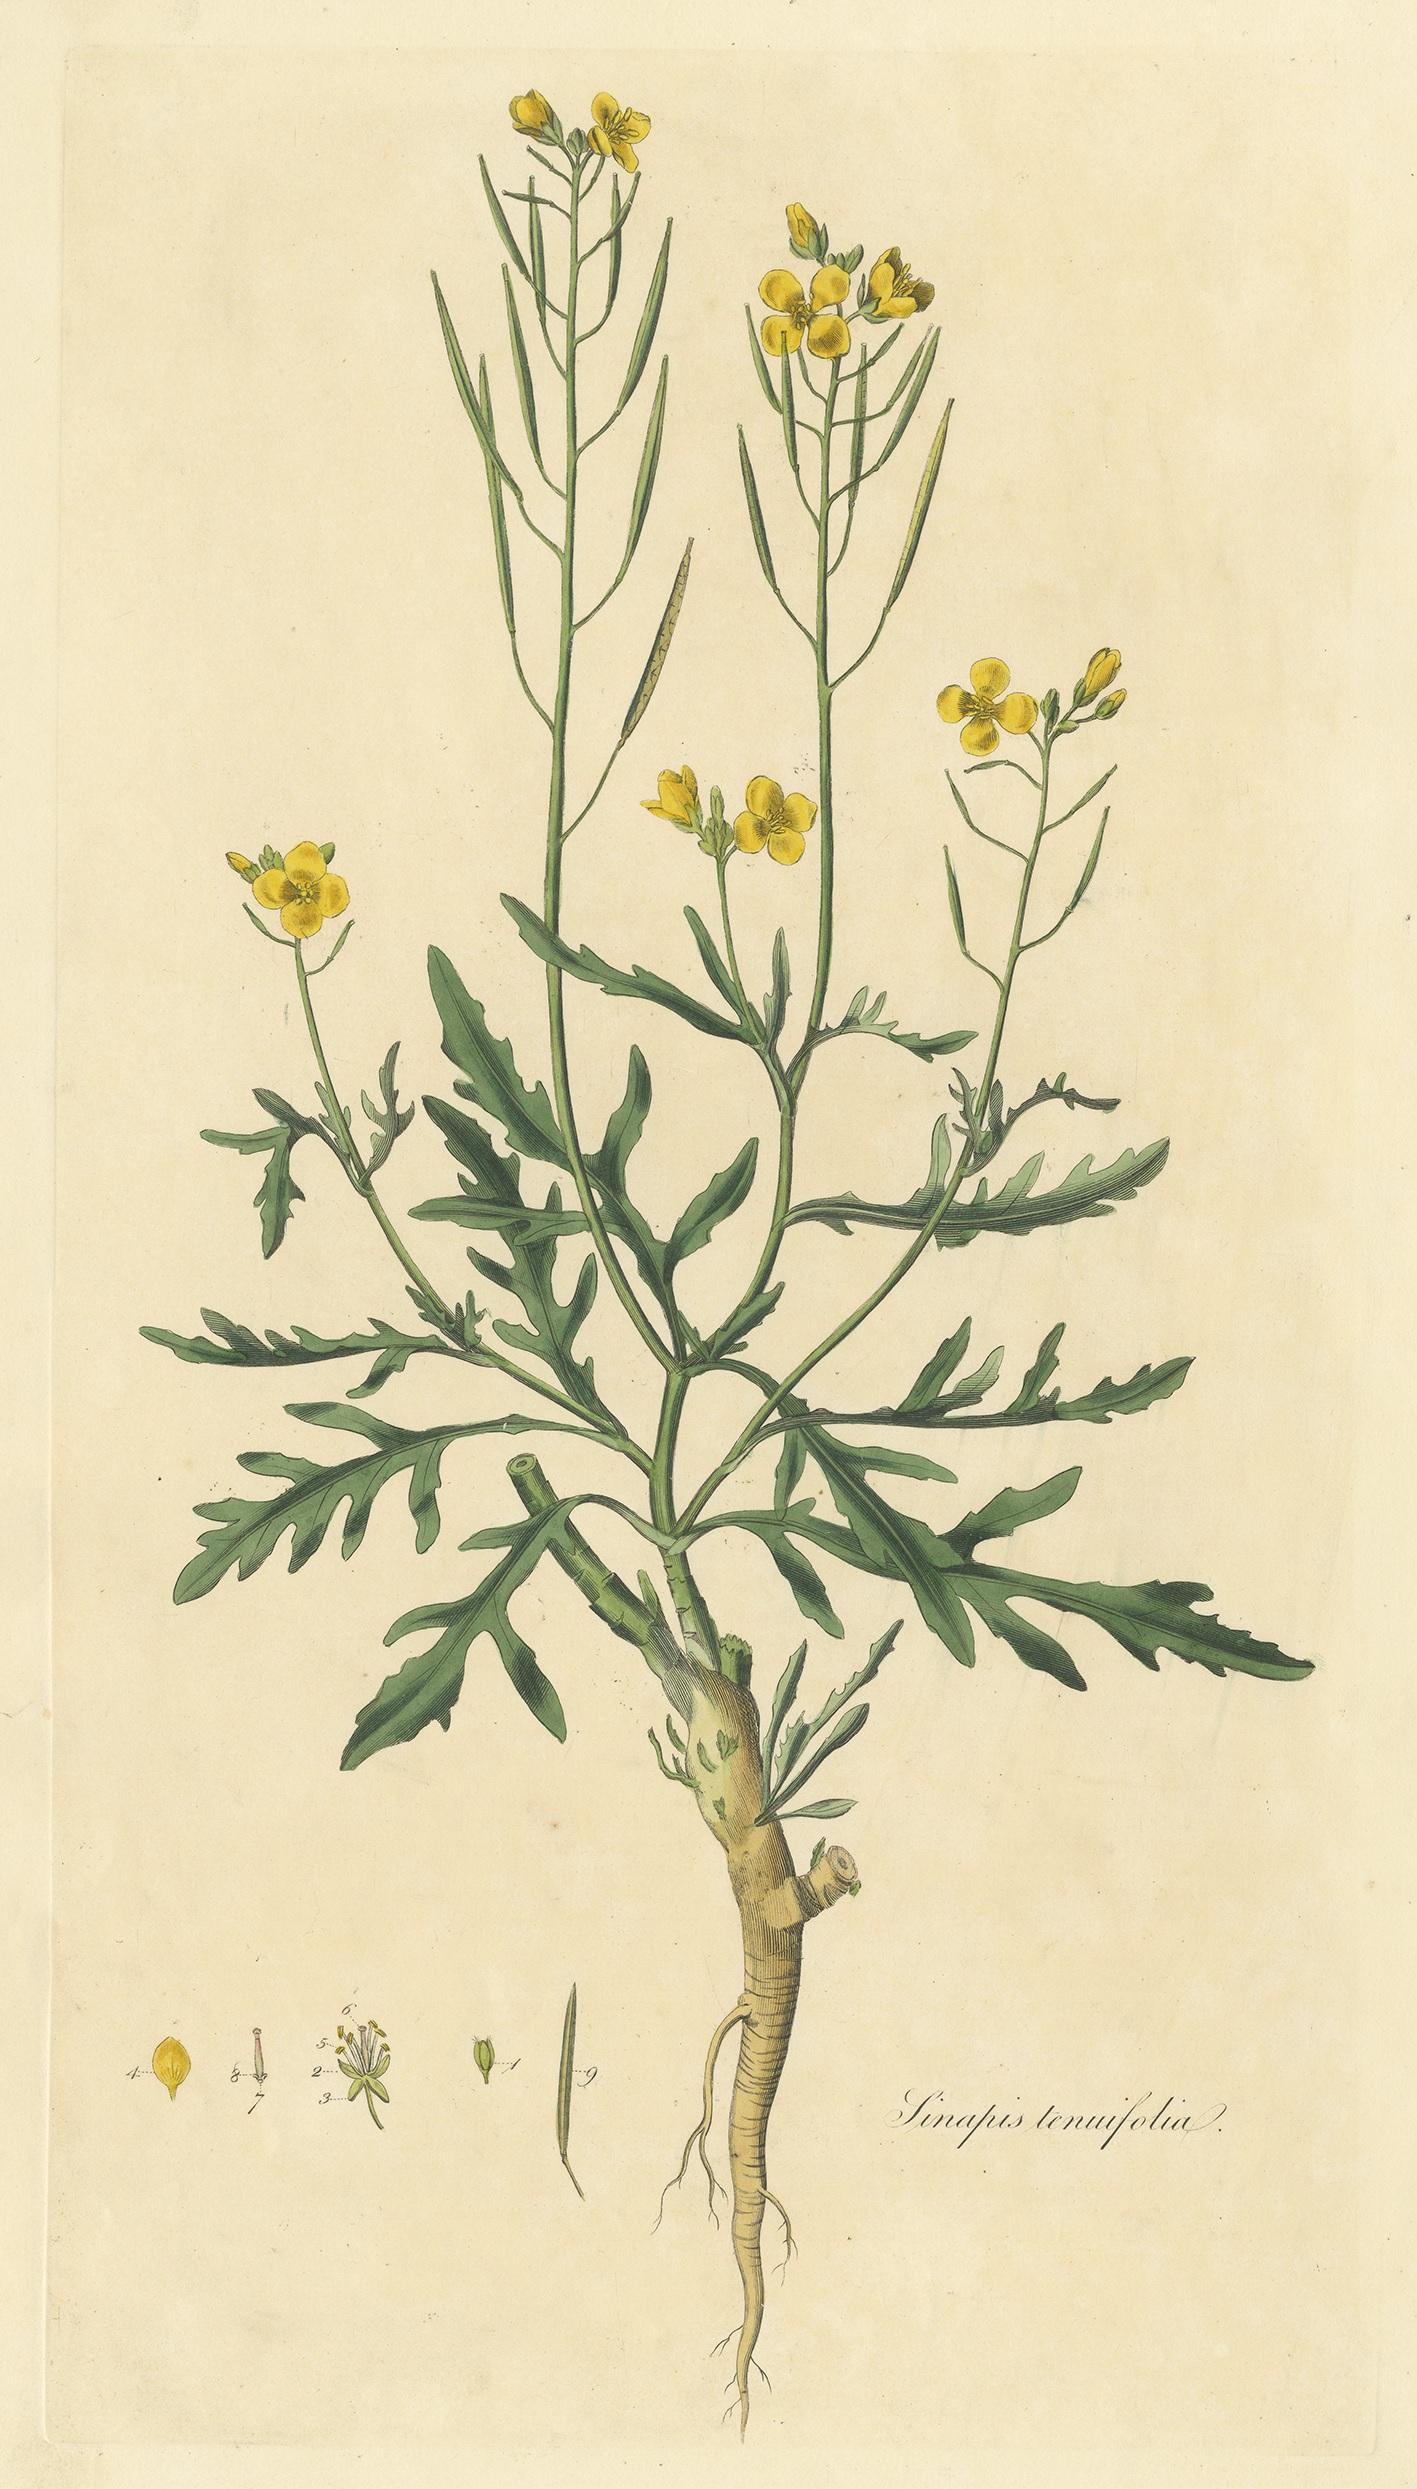 Antique botany print titled 'Sinapsis Tenuifolia'. Hand colored engraving of diplotaxis tenuifolia also known as wild rocket and perennial wall-rocket. This print originates from 'Flora Londinensis' by William Curtis.